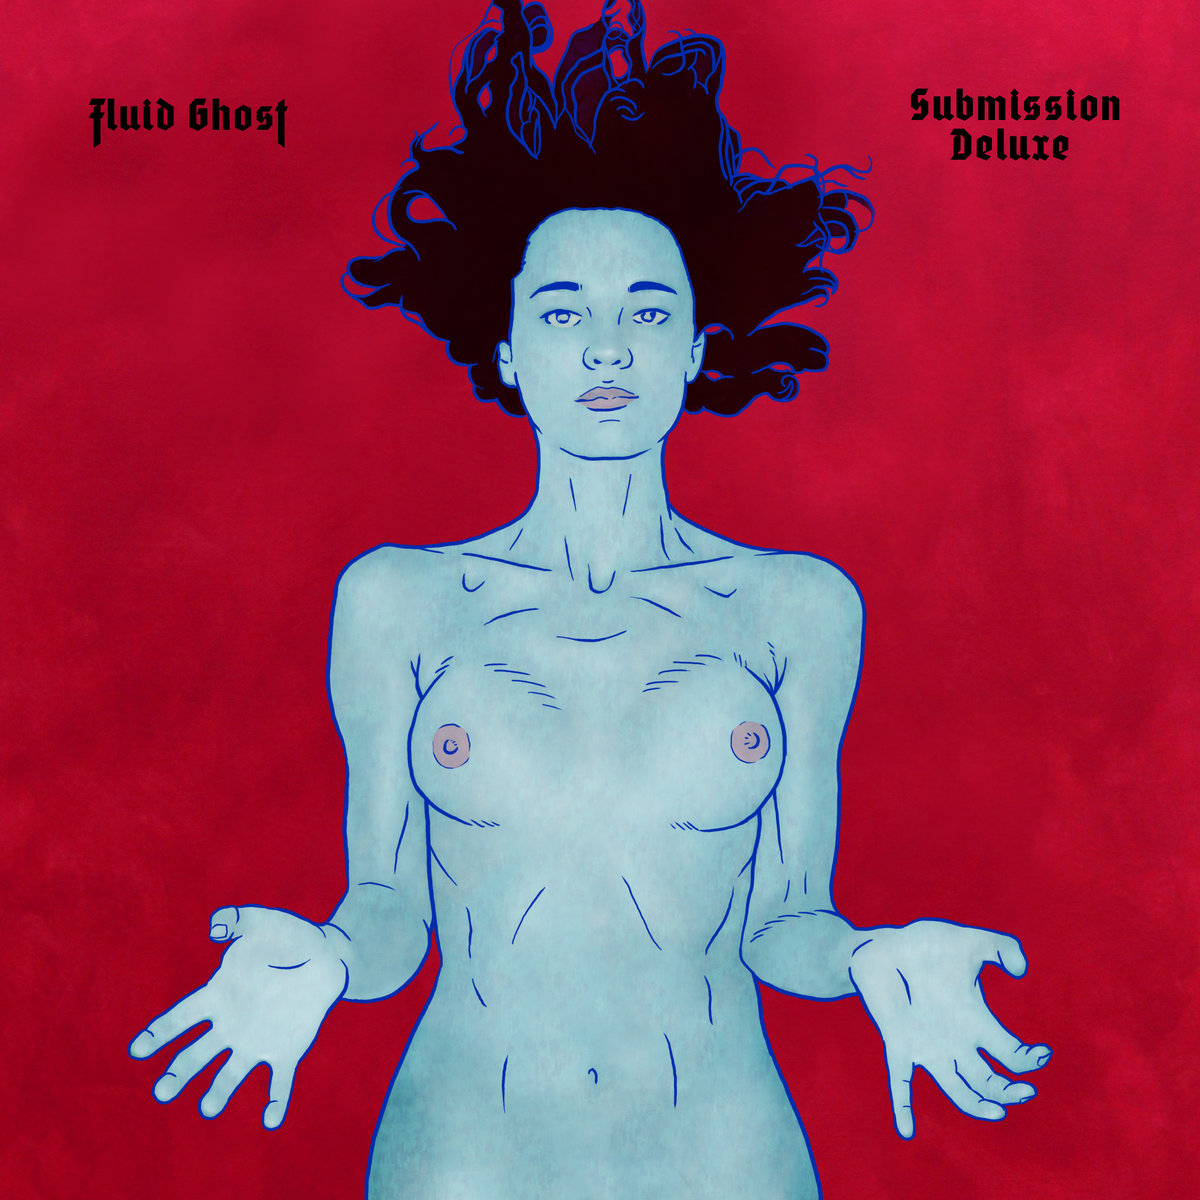 Fluid Ghost, “Submission Deluxe”